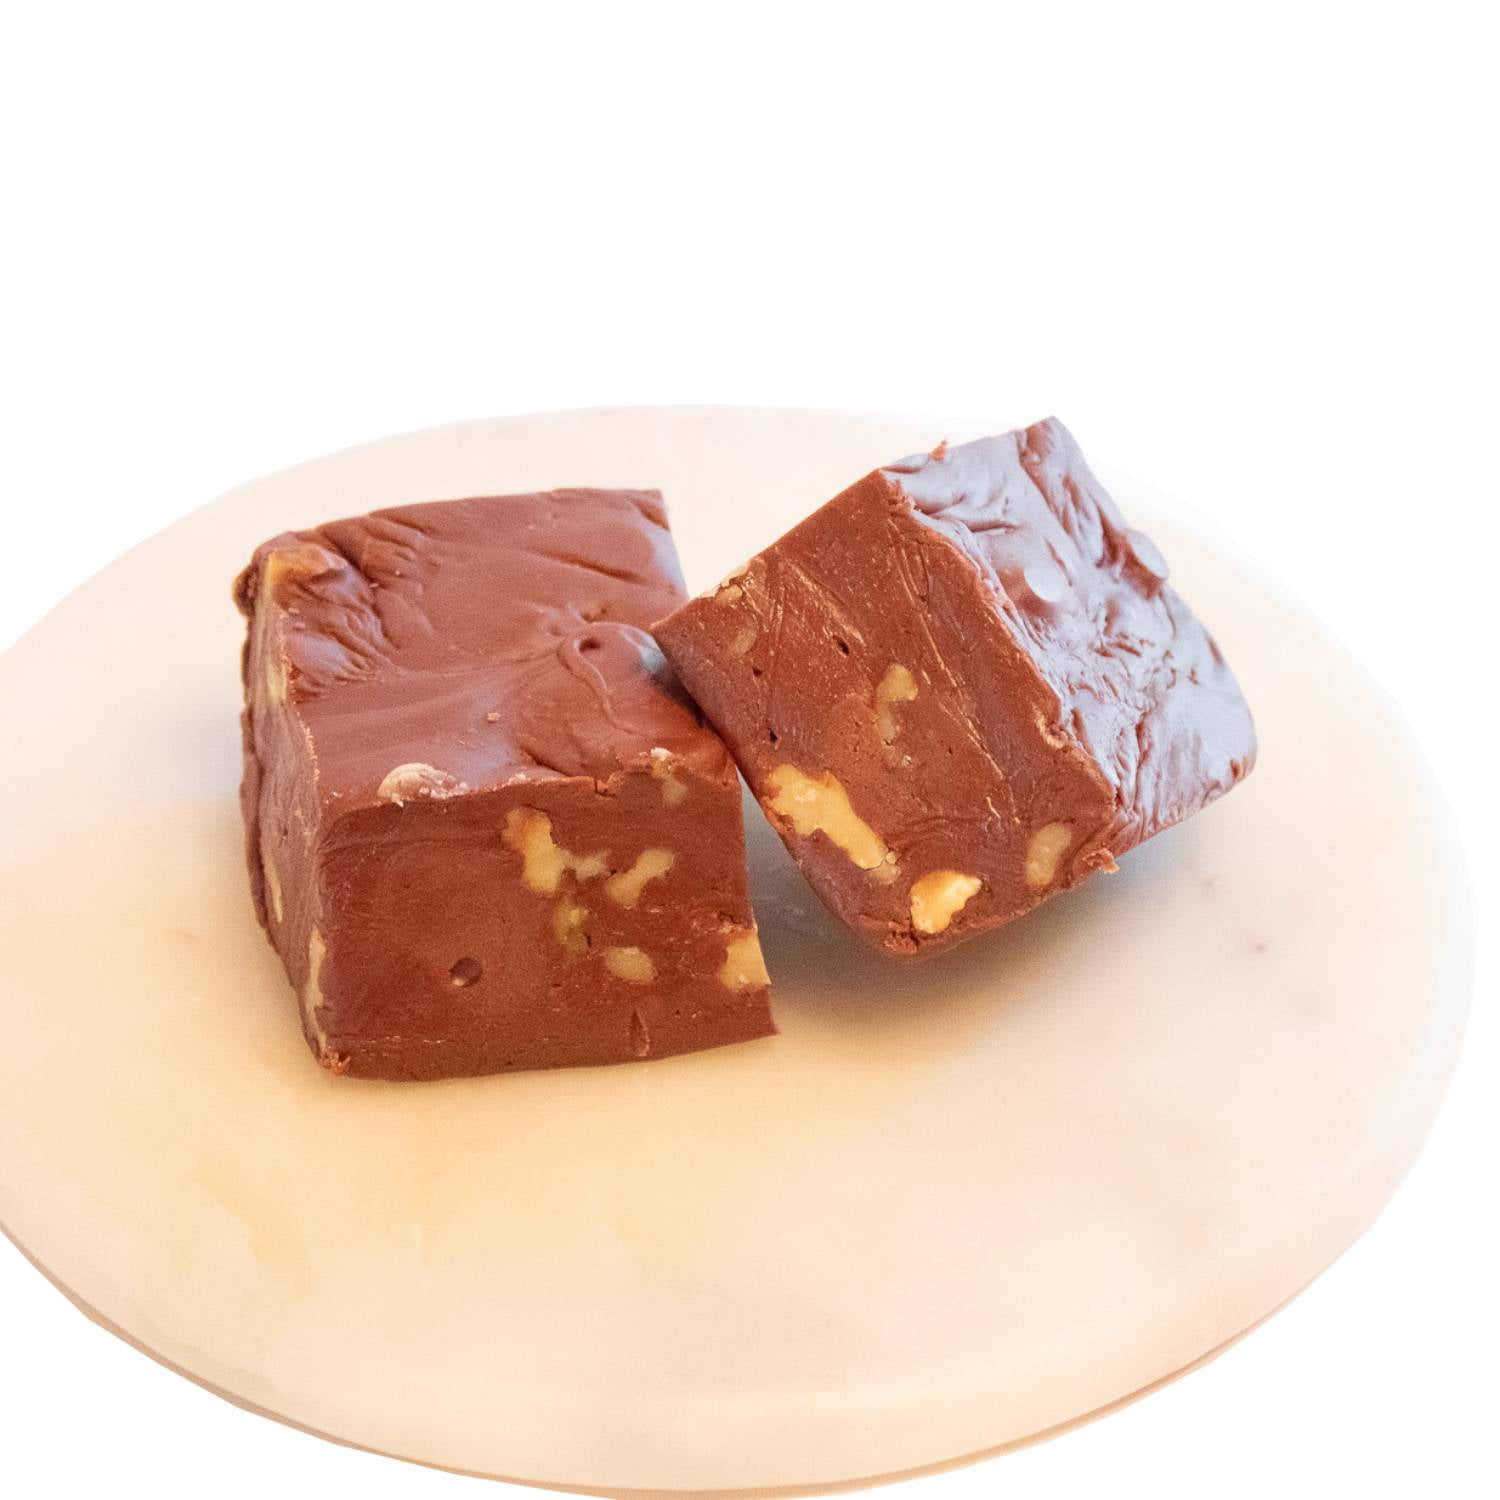 Fudge - Chocolate with mini M&M's® - 1/4 lb. package with spoon - True  Confections Candy Store & More